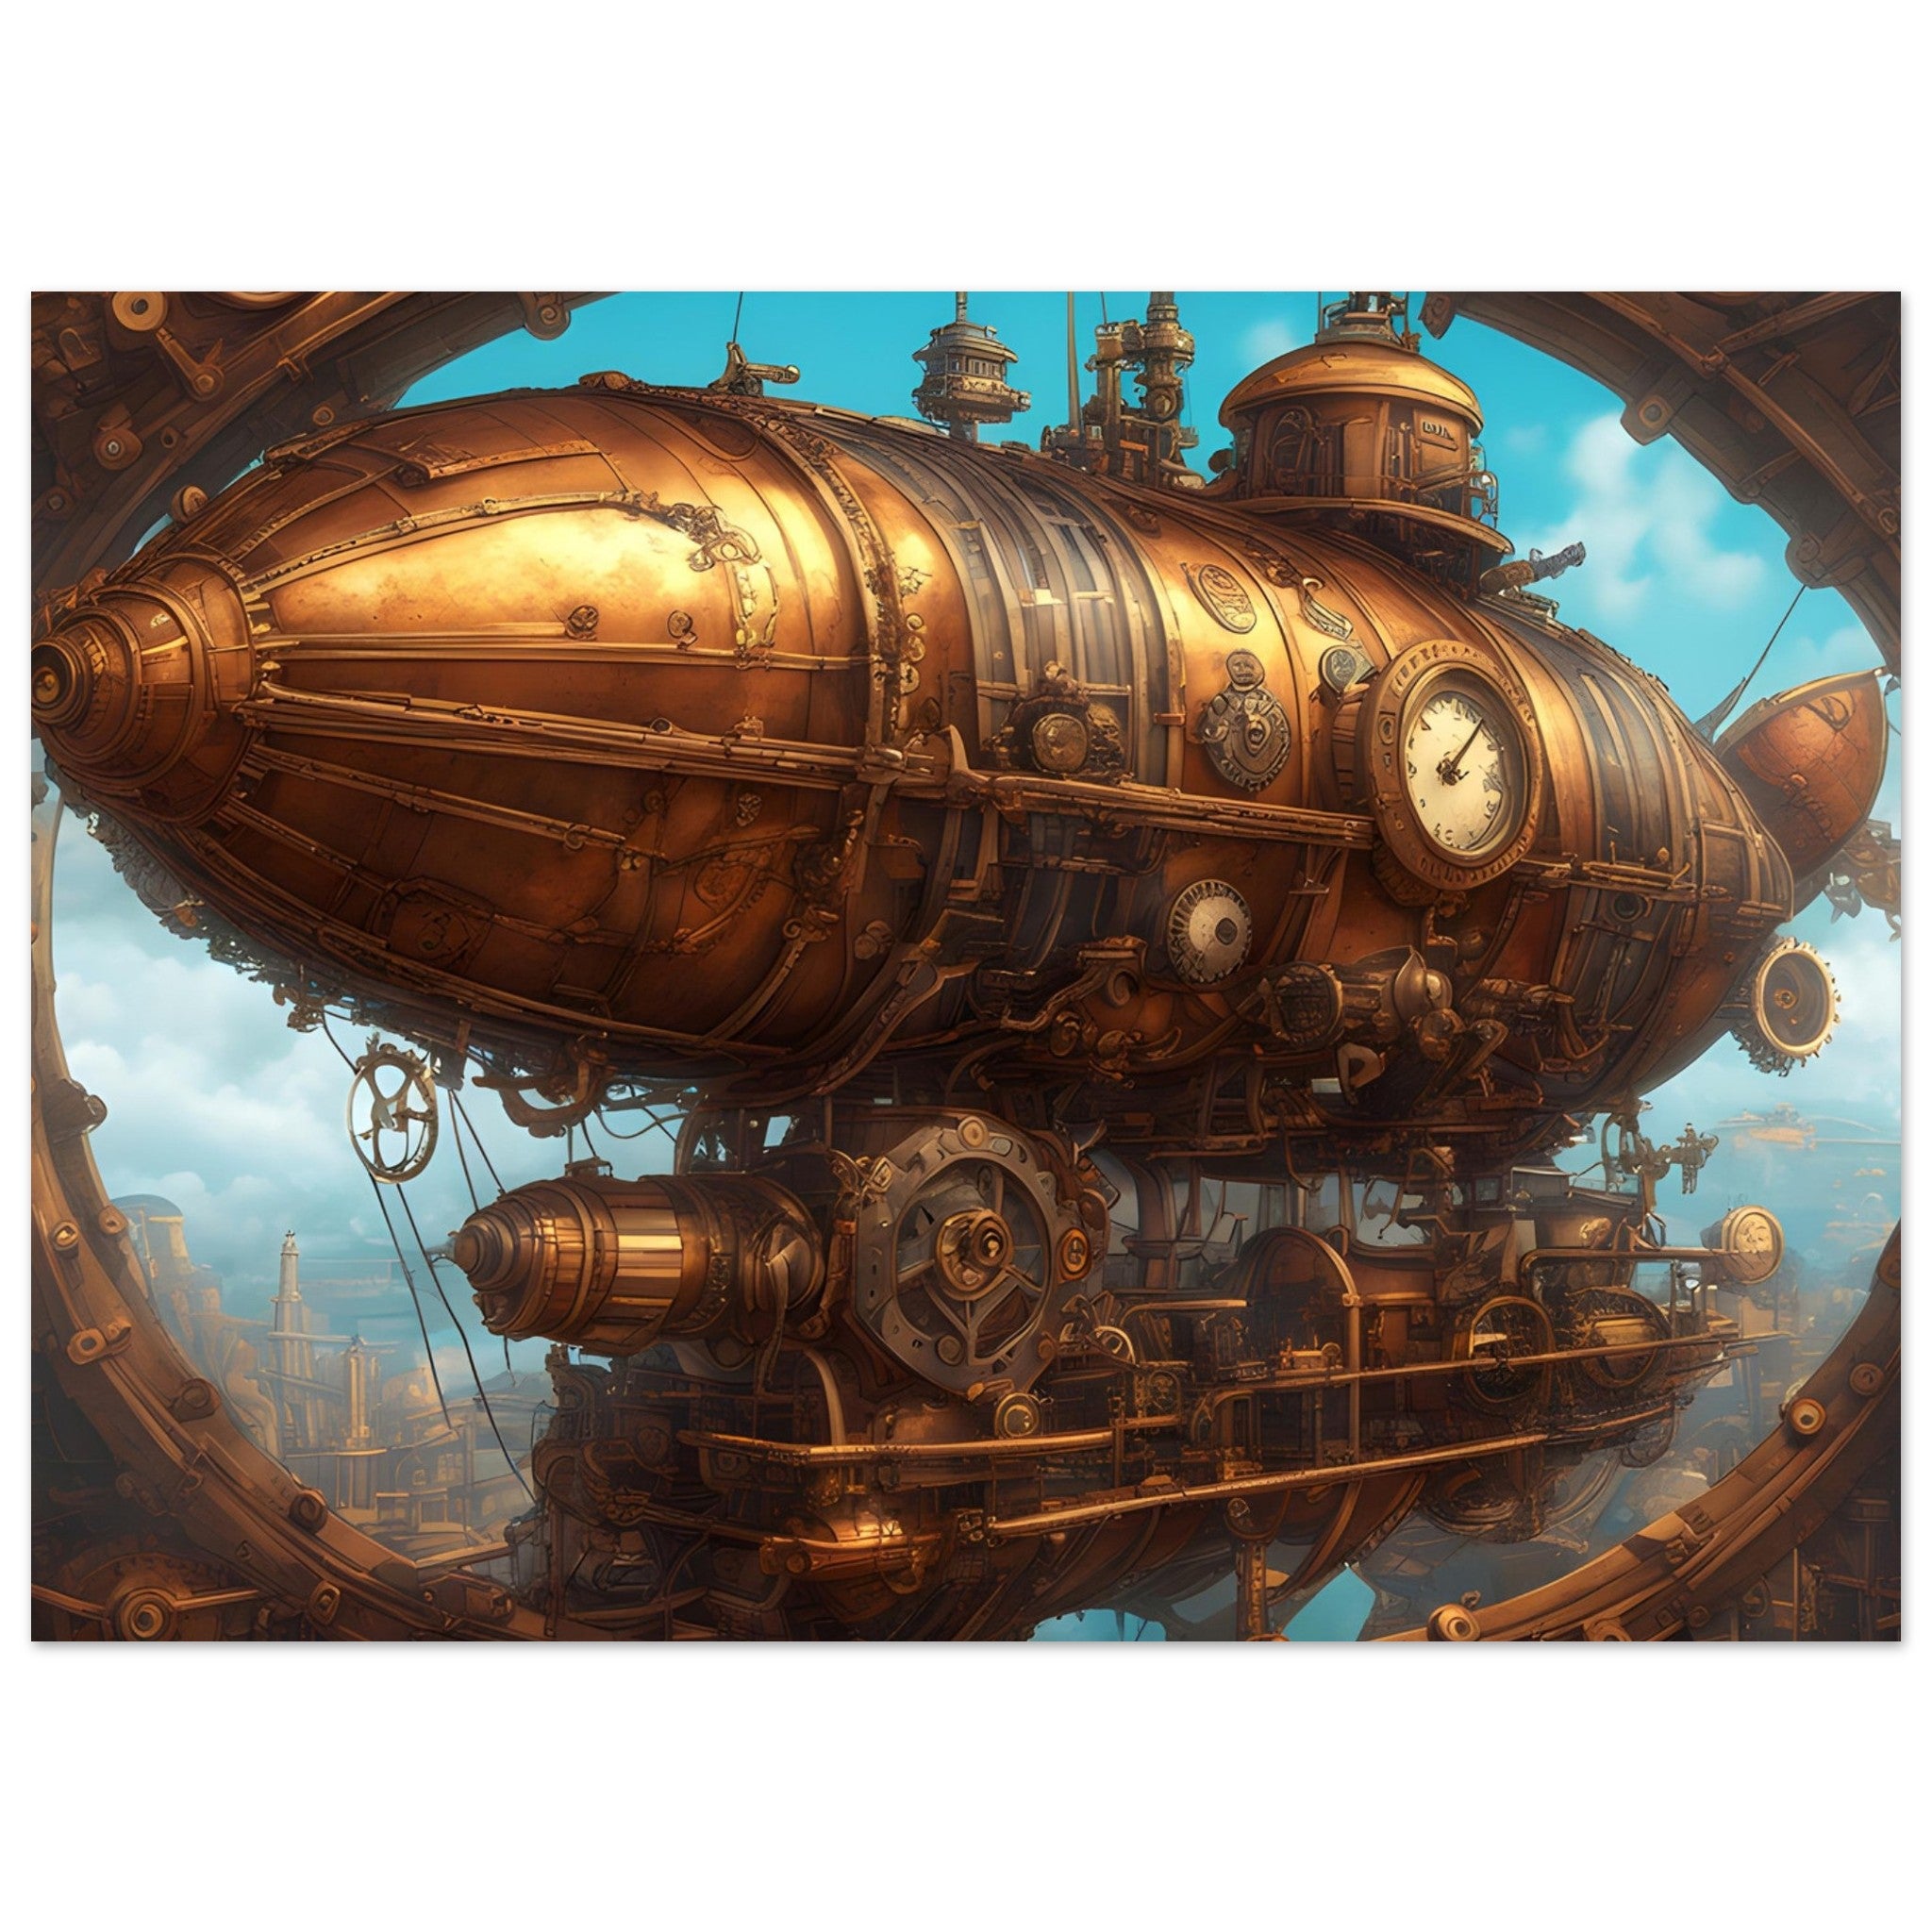 Steampunk Art - The Aether Voyager